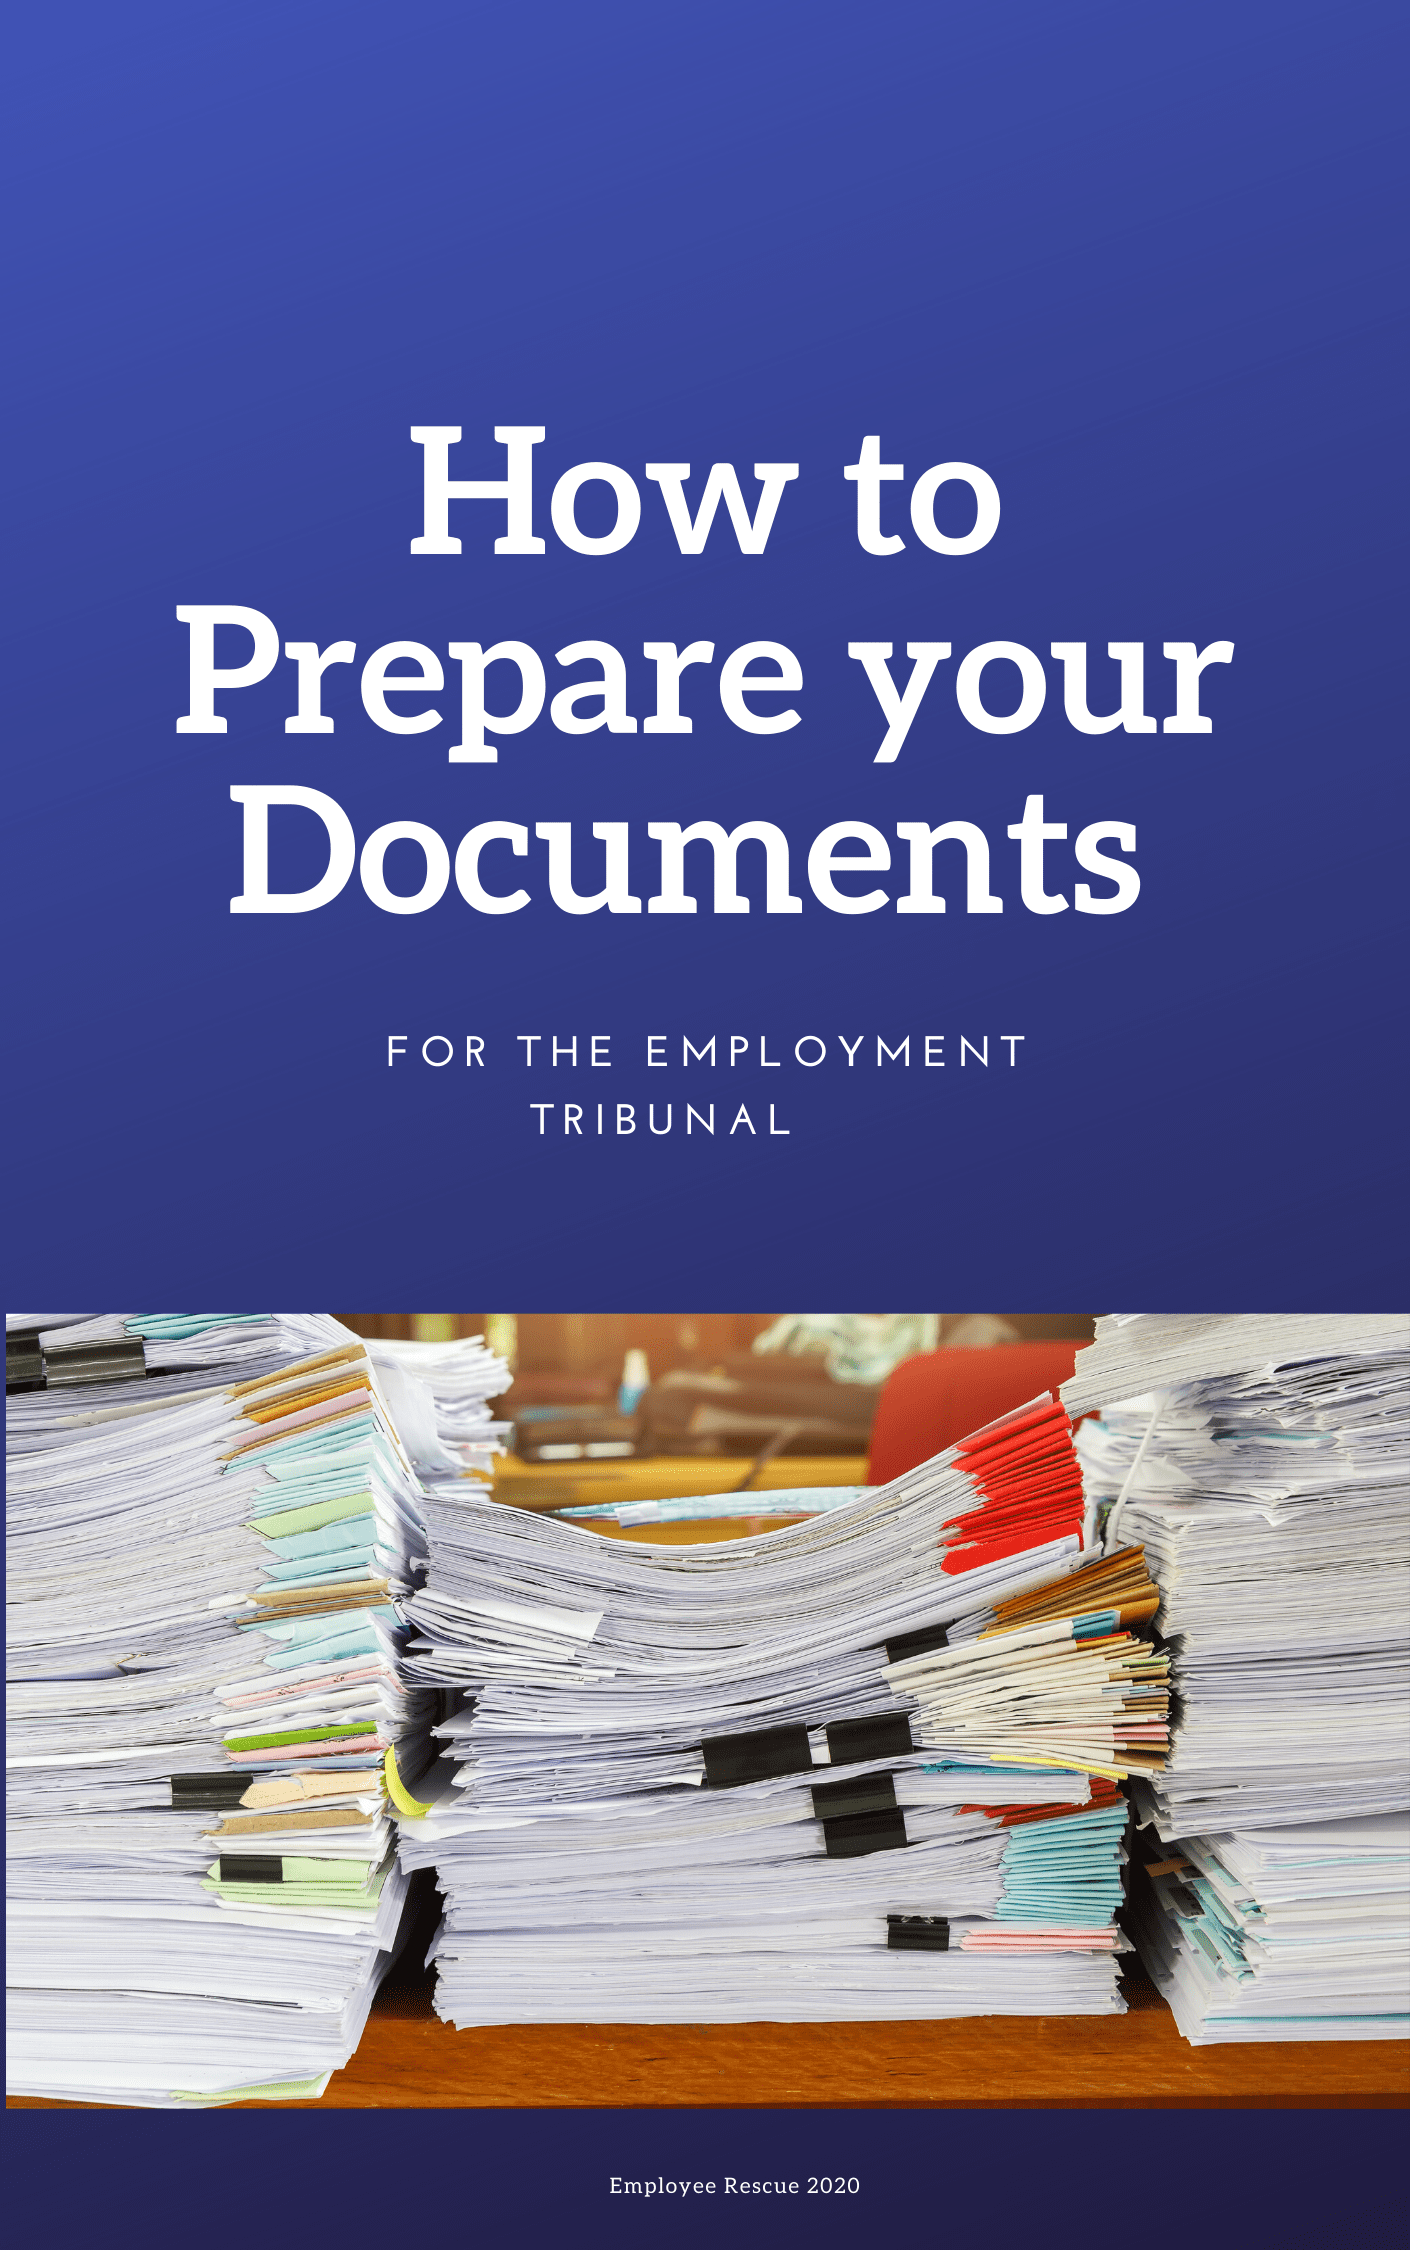 How to Prepare Your Document List and Bundle